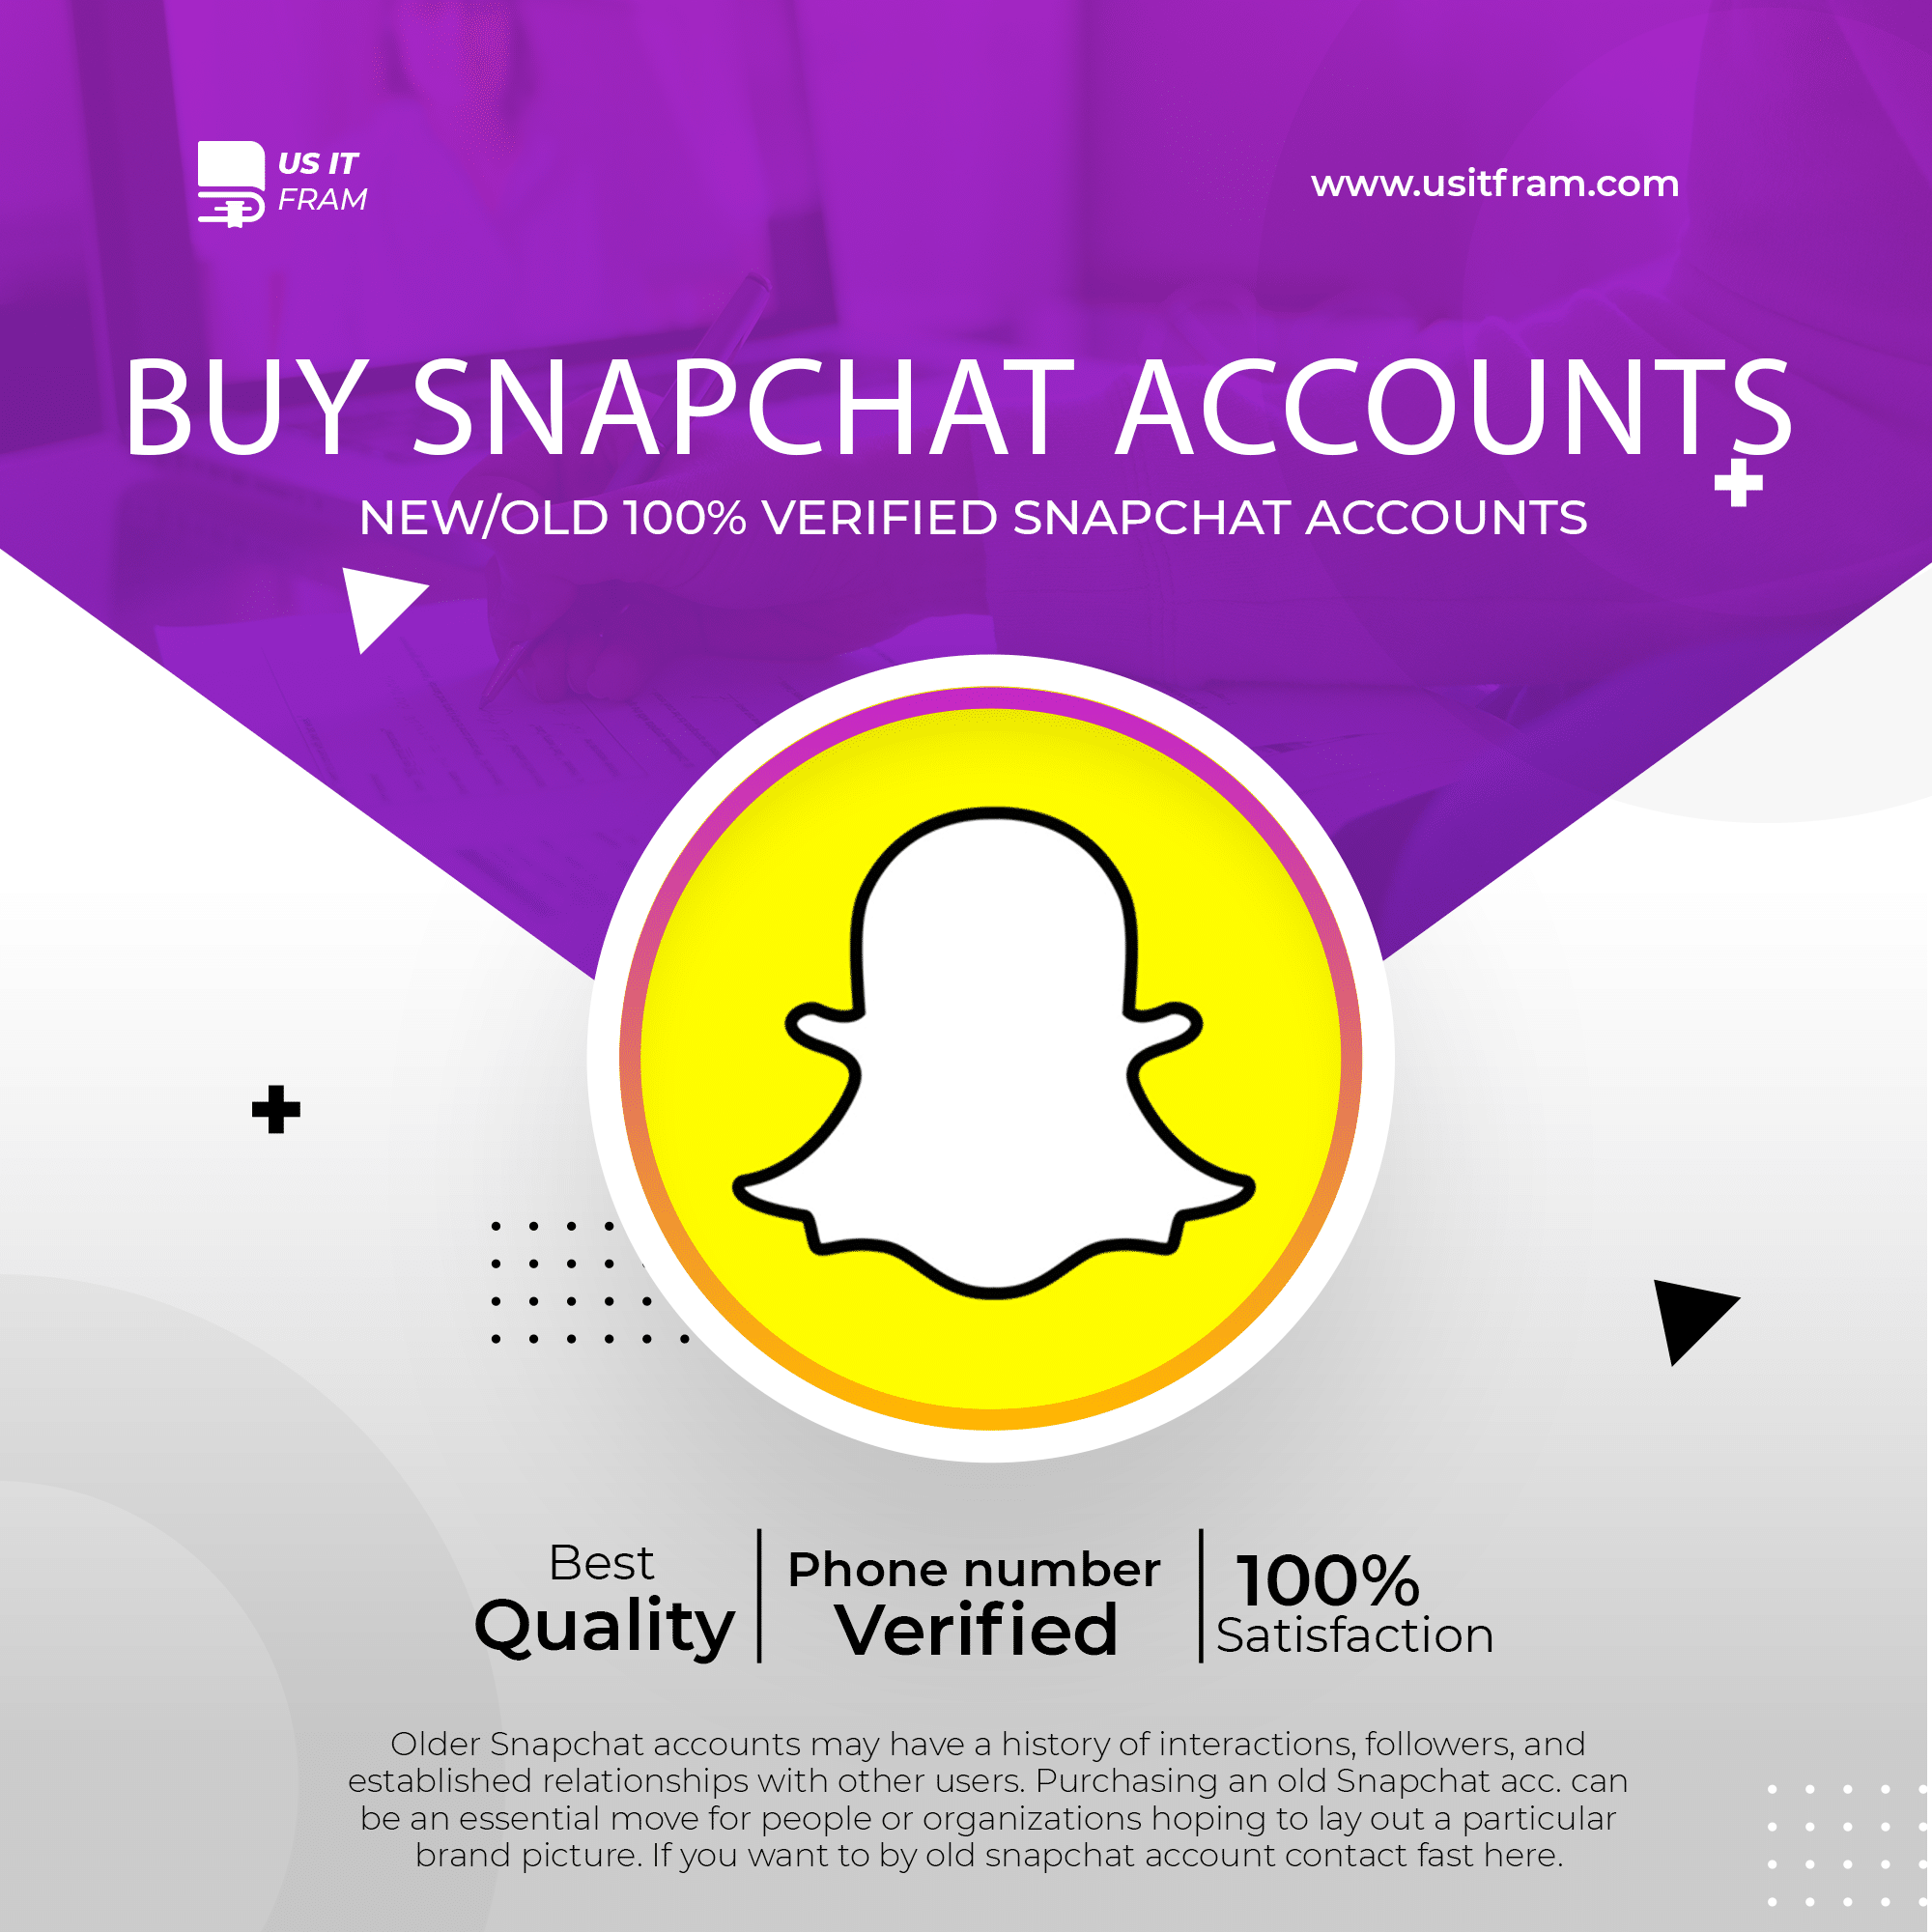 Buy Snapchat Accounts - New/Old 100% Best Quality Accounts